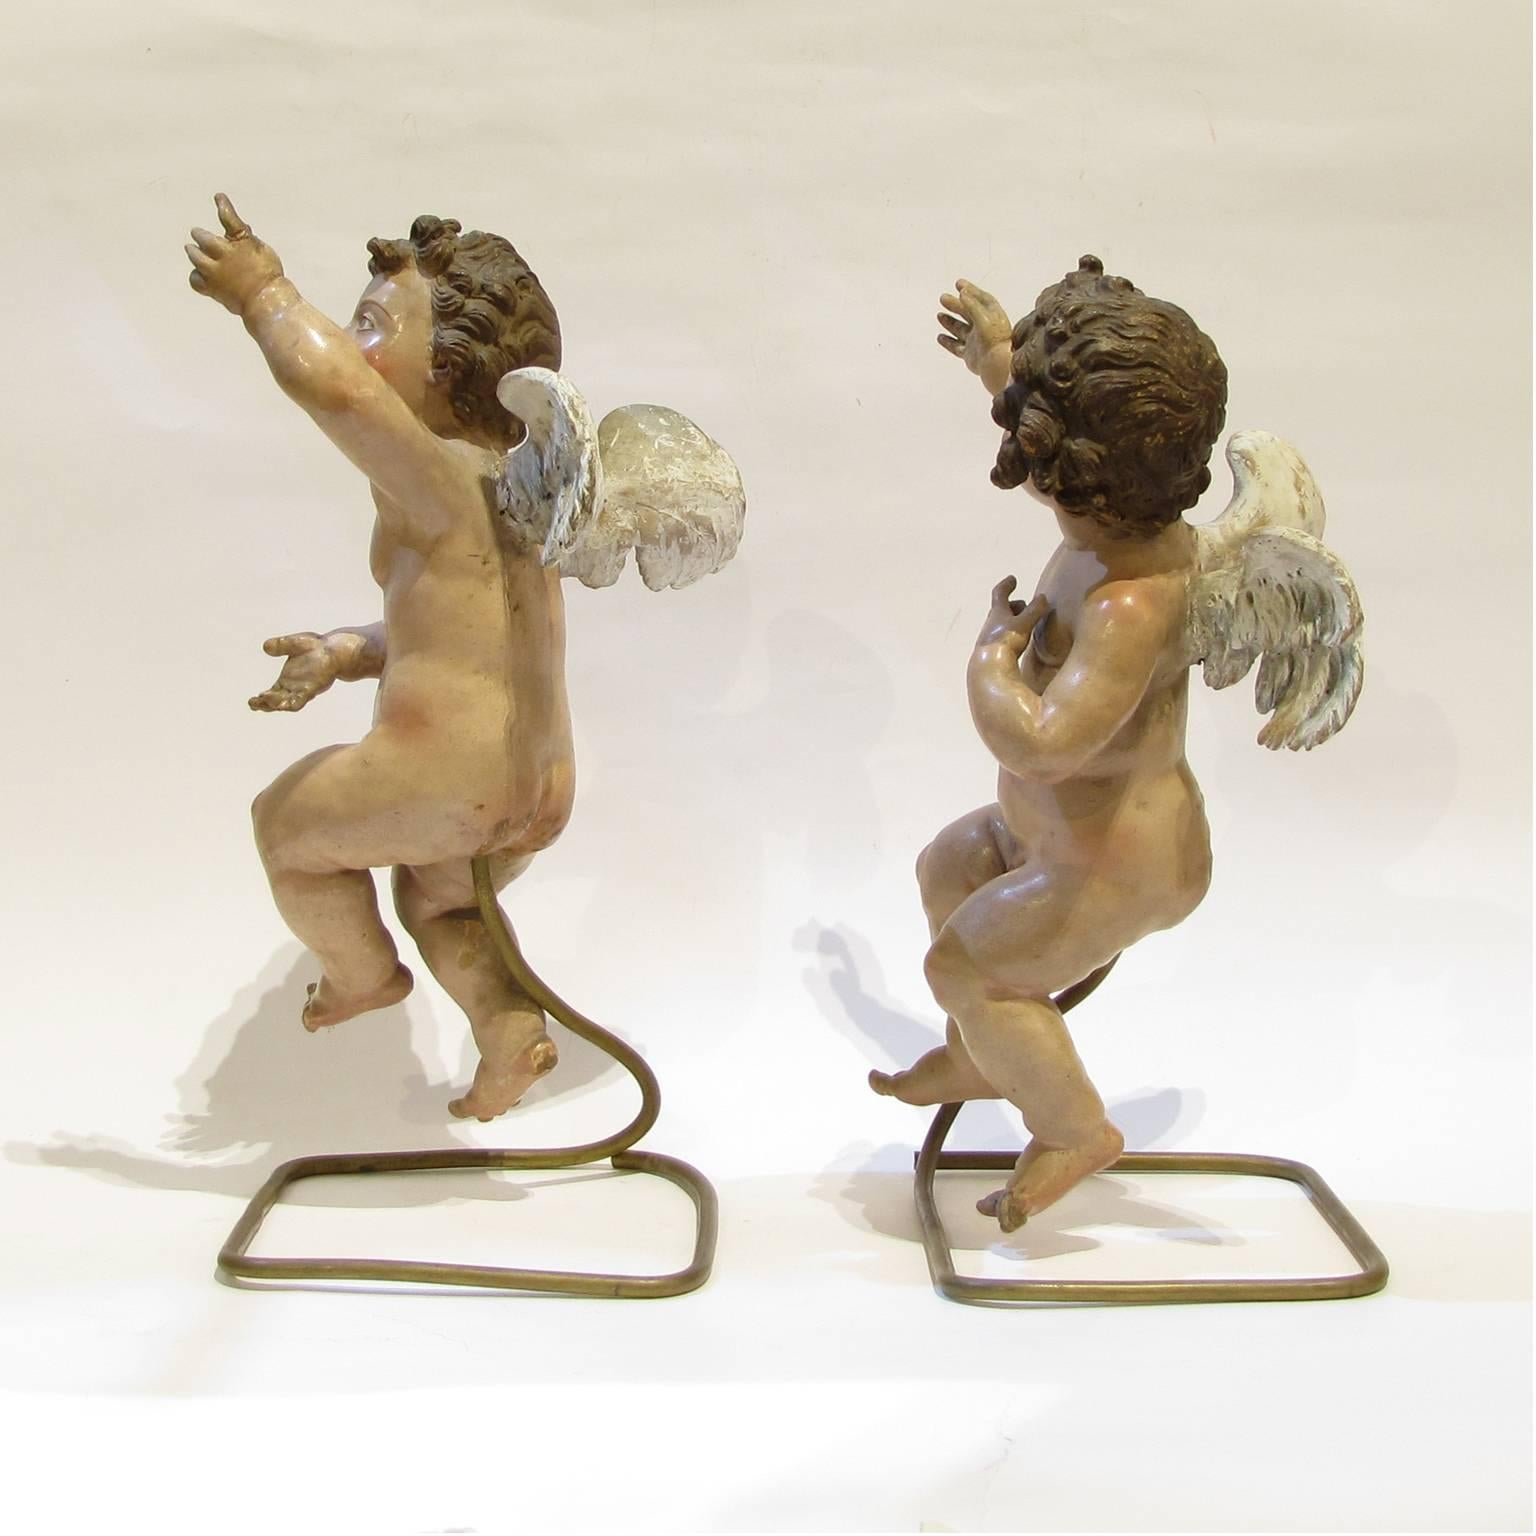 Two Early 18th Century Neapolitan Polychrome Terracotta Angels 1